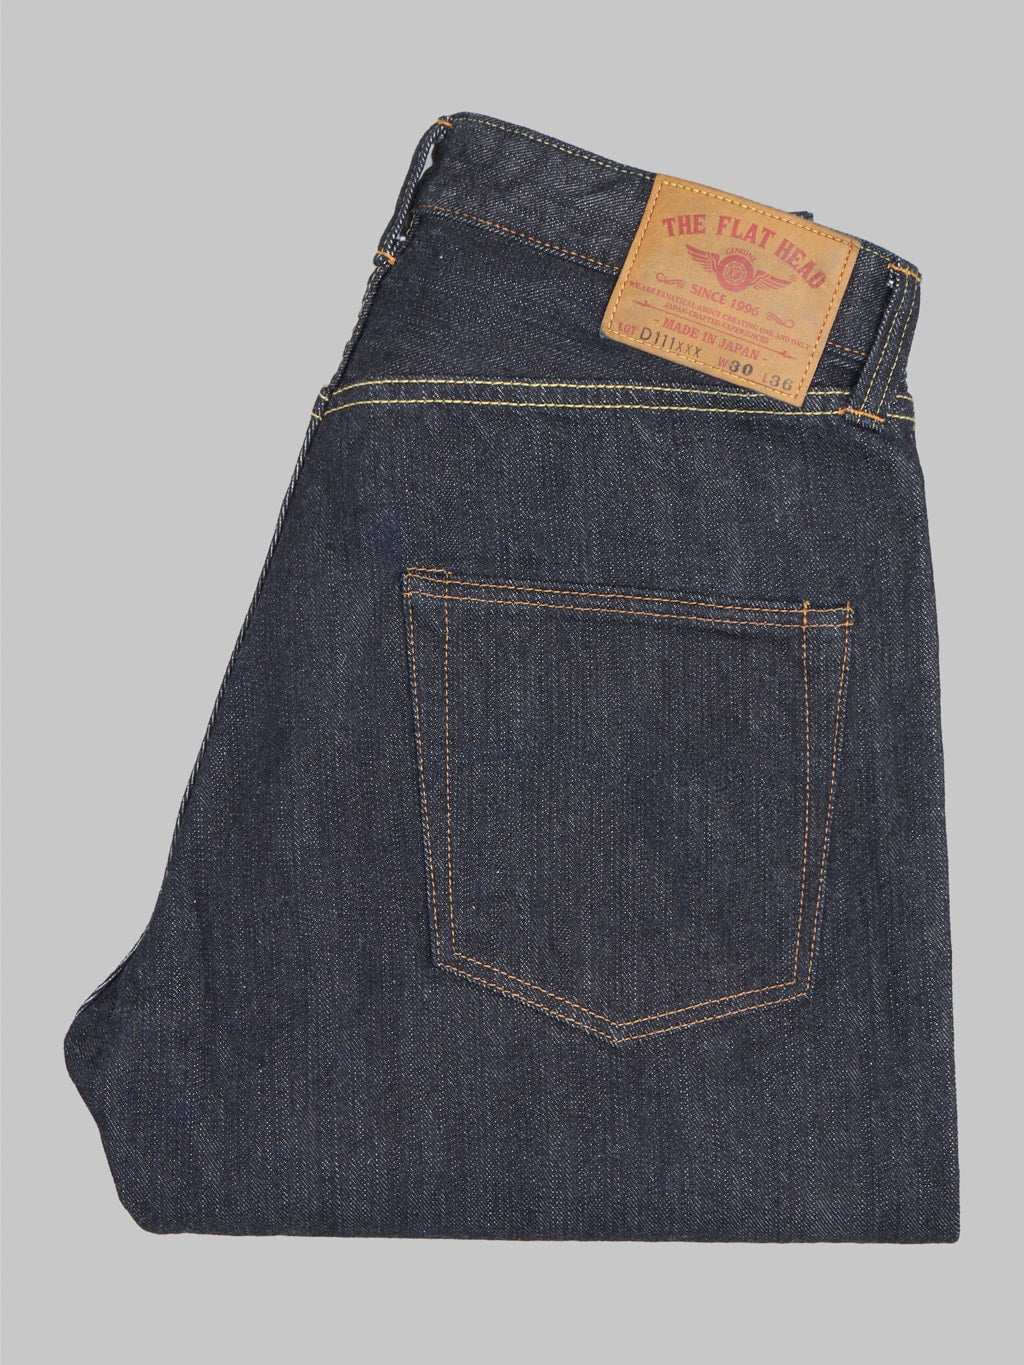 the flat head fn d111 wide straight selvedge denim jeans fabric